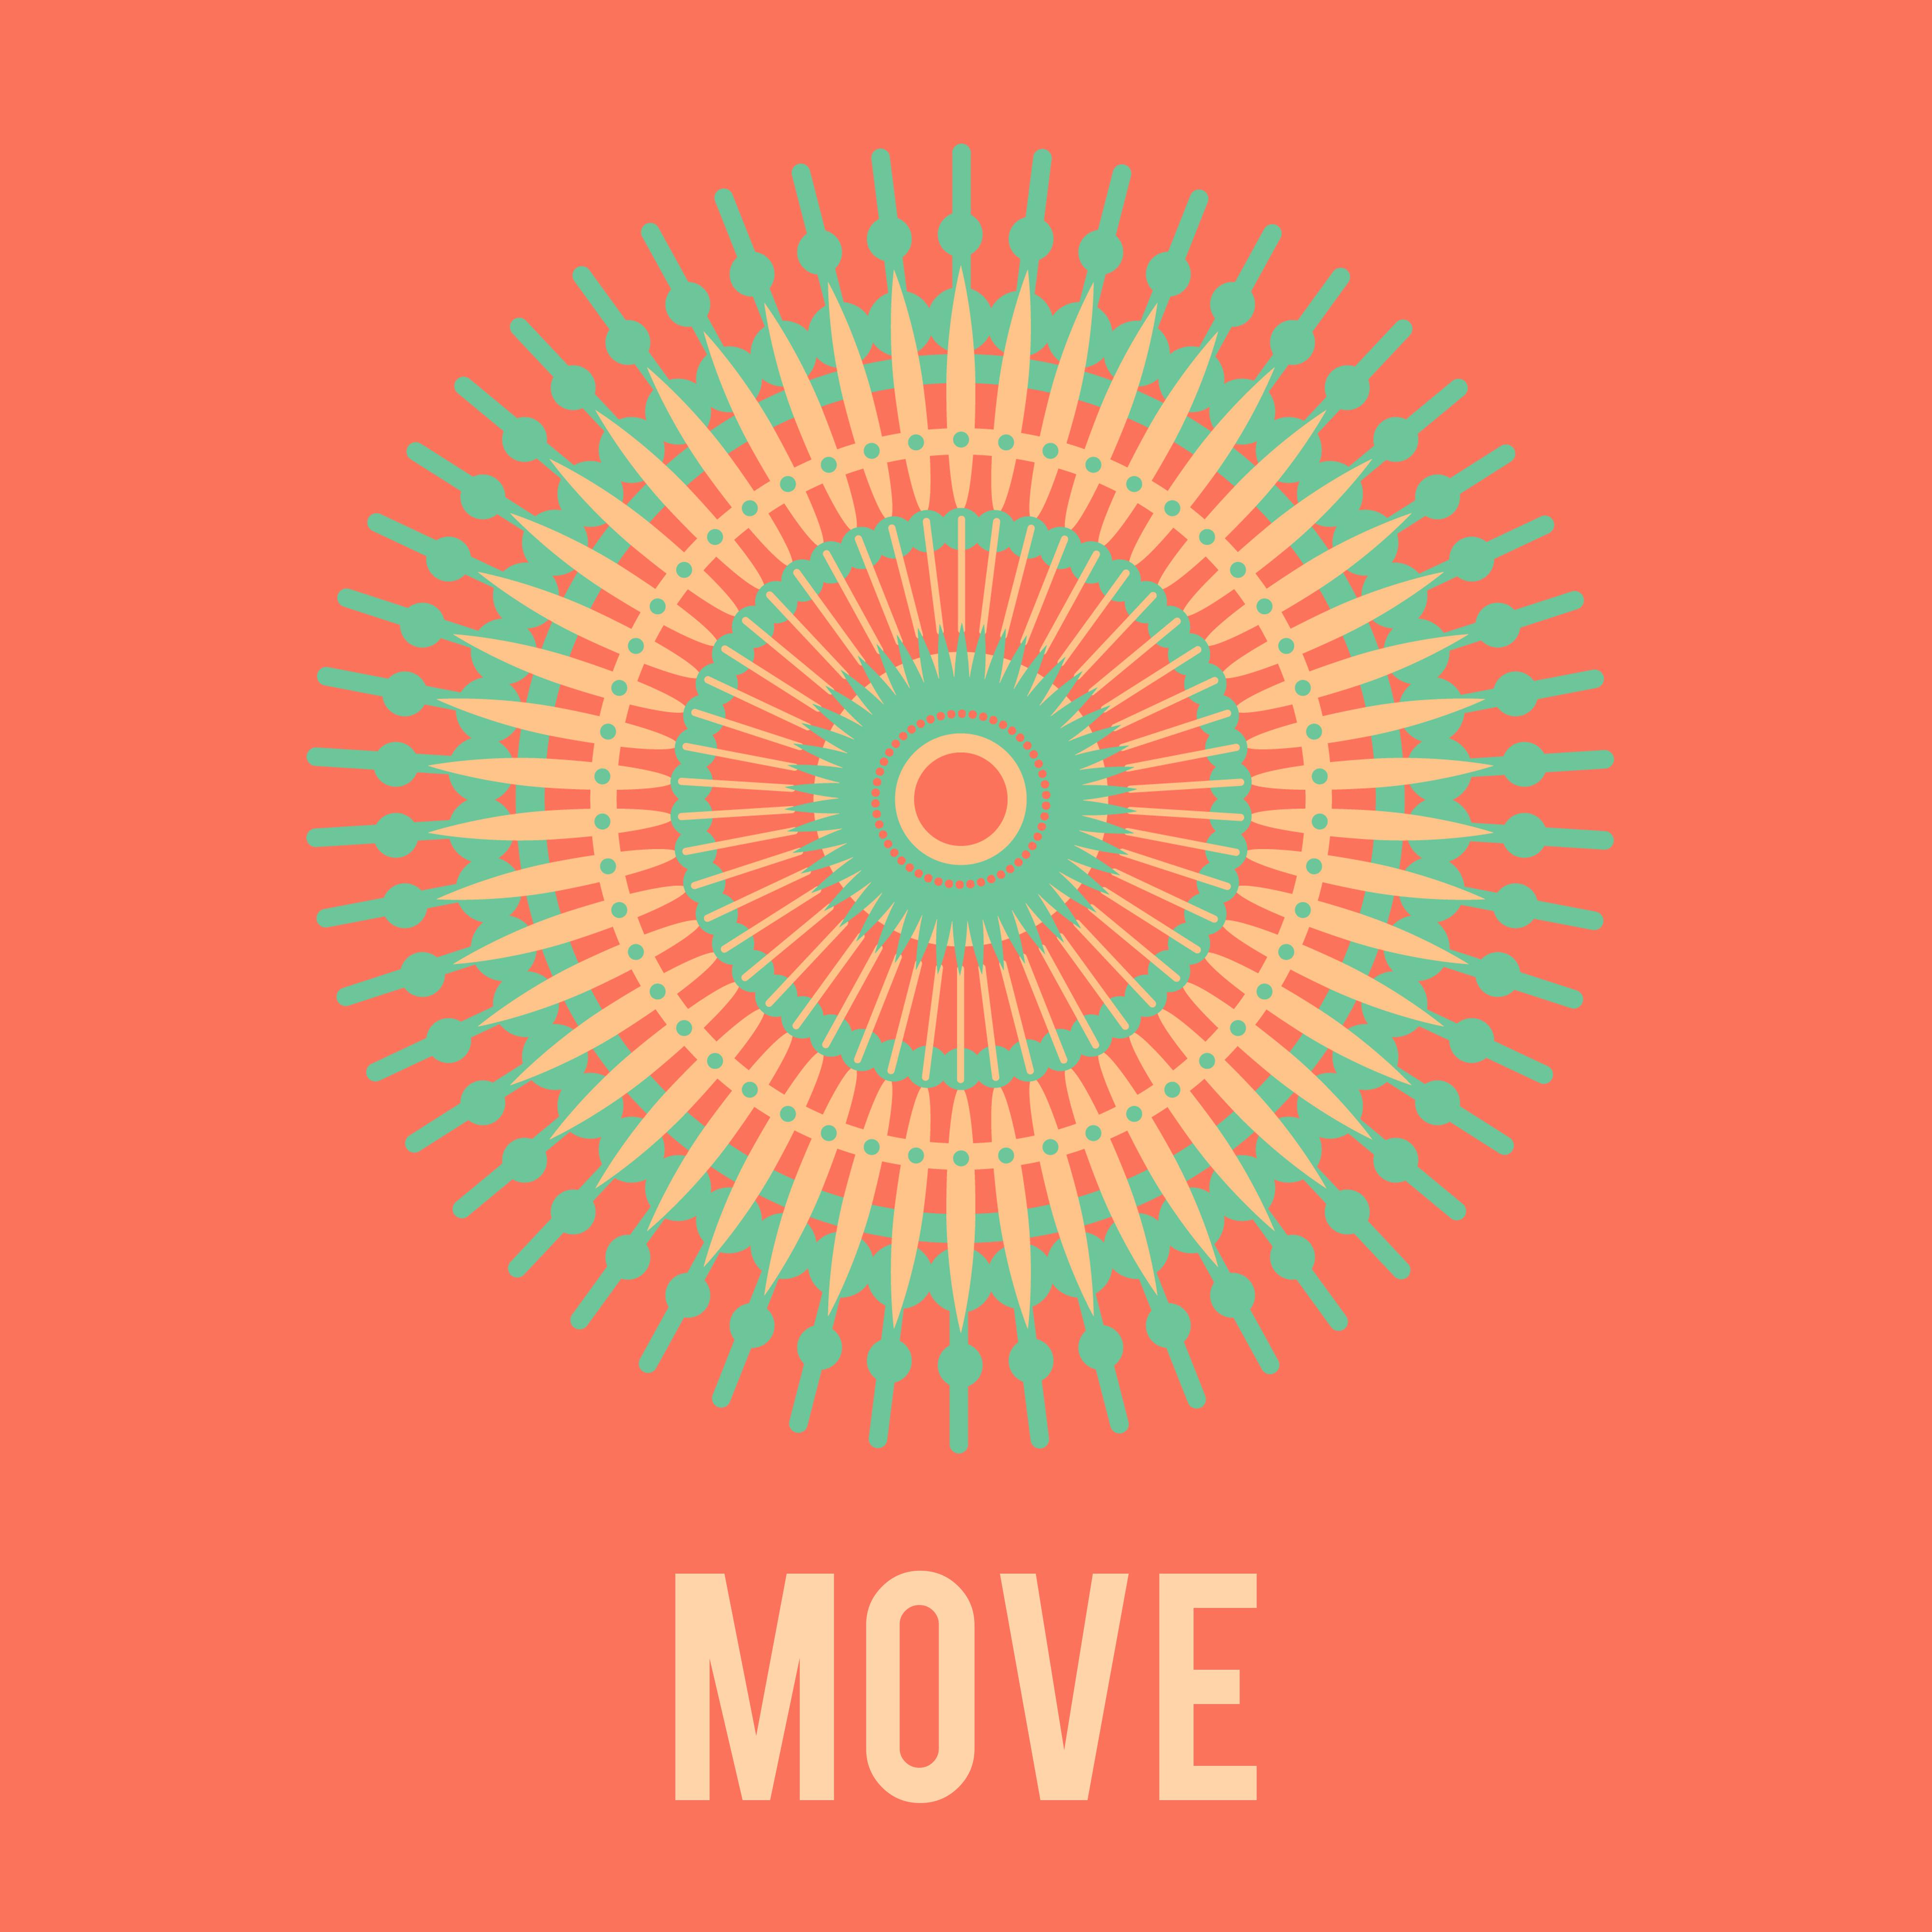 Move – New Age 2017, Music for Meditation, Relaxation, Rest, Yoga, Mantra, Tantra